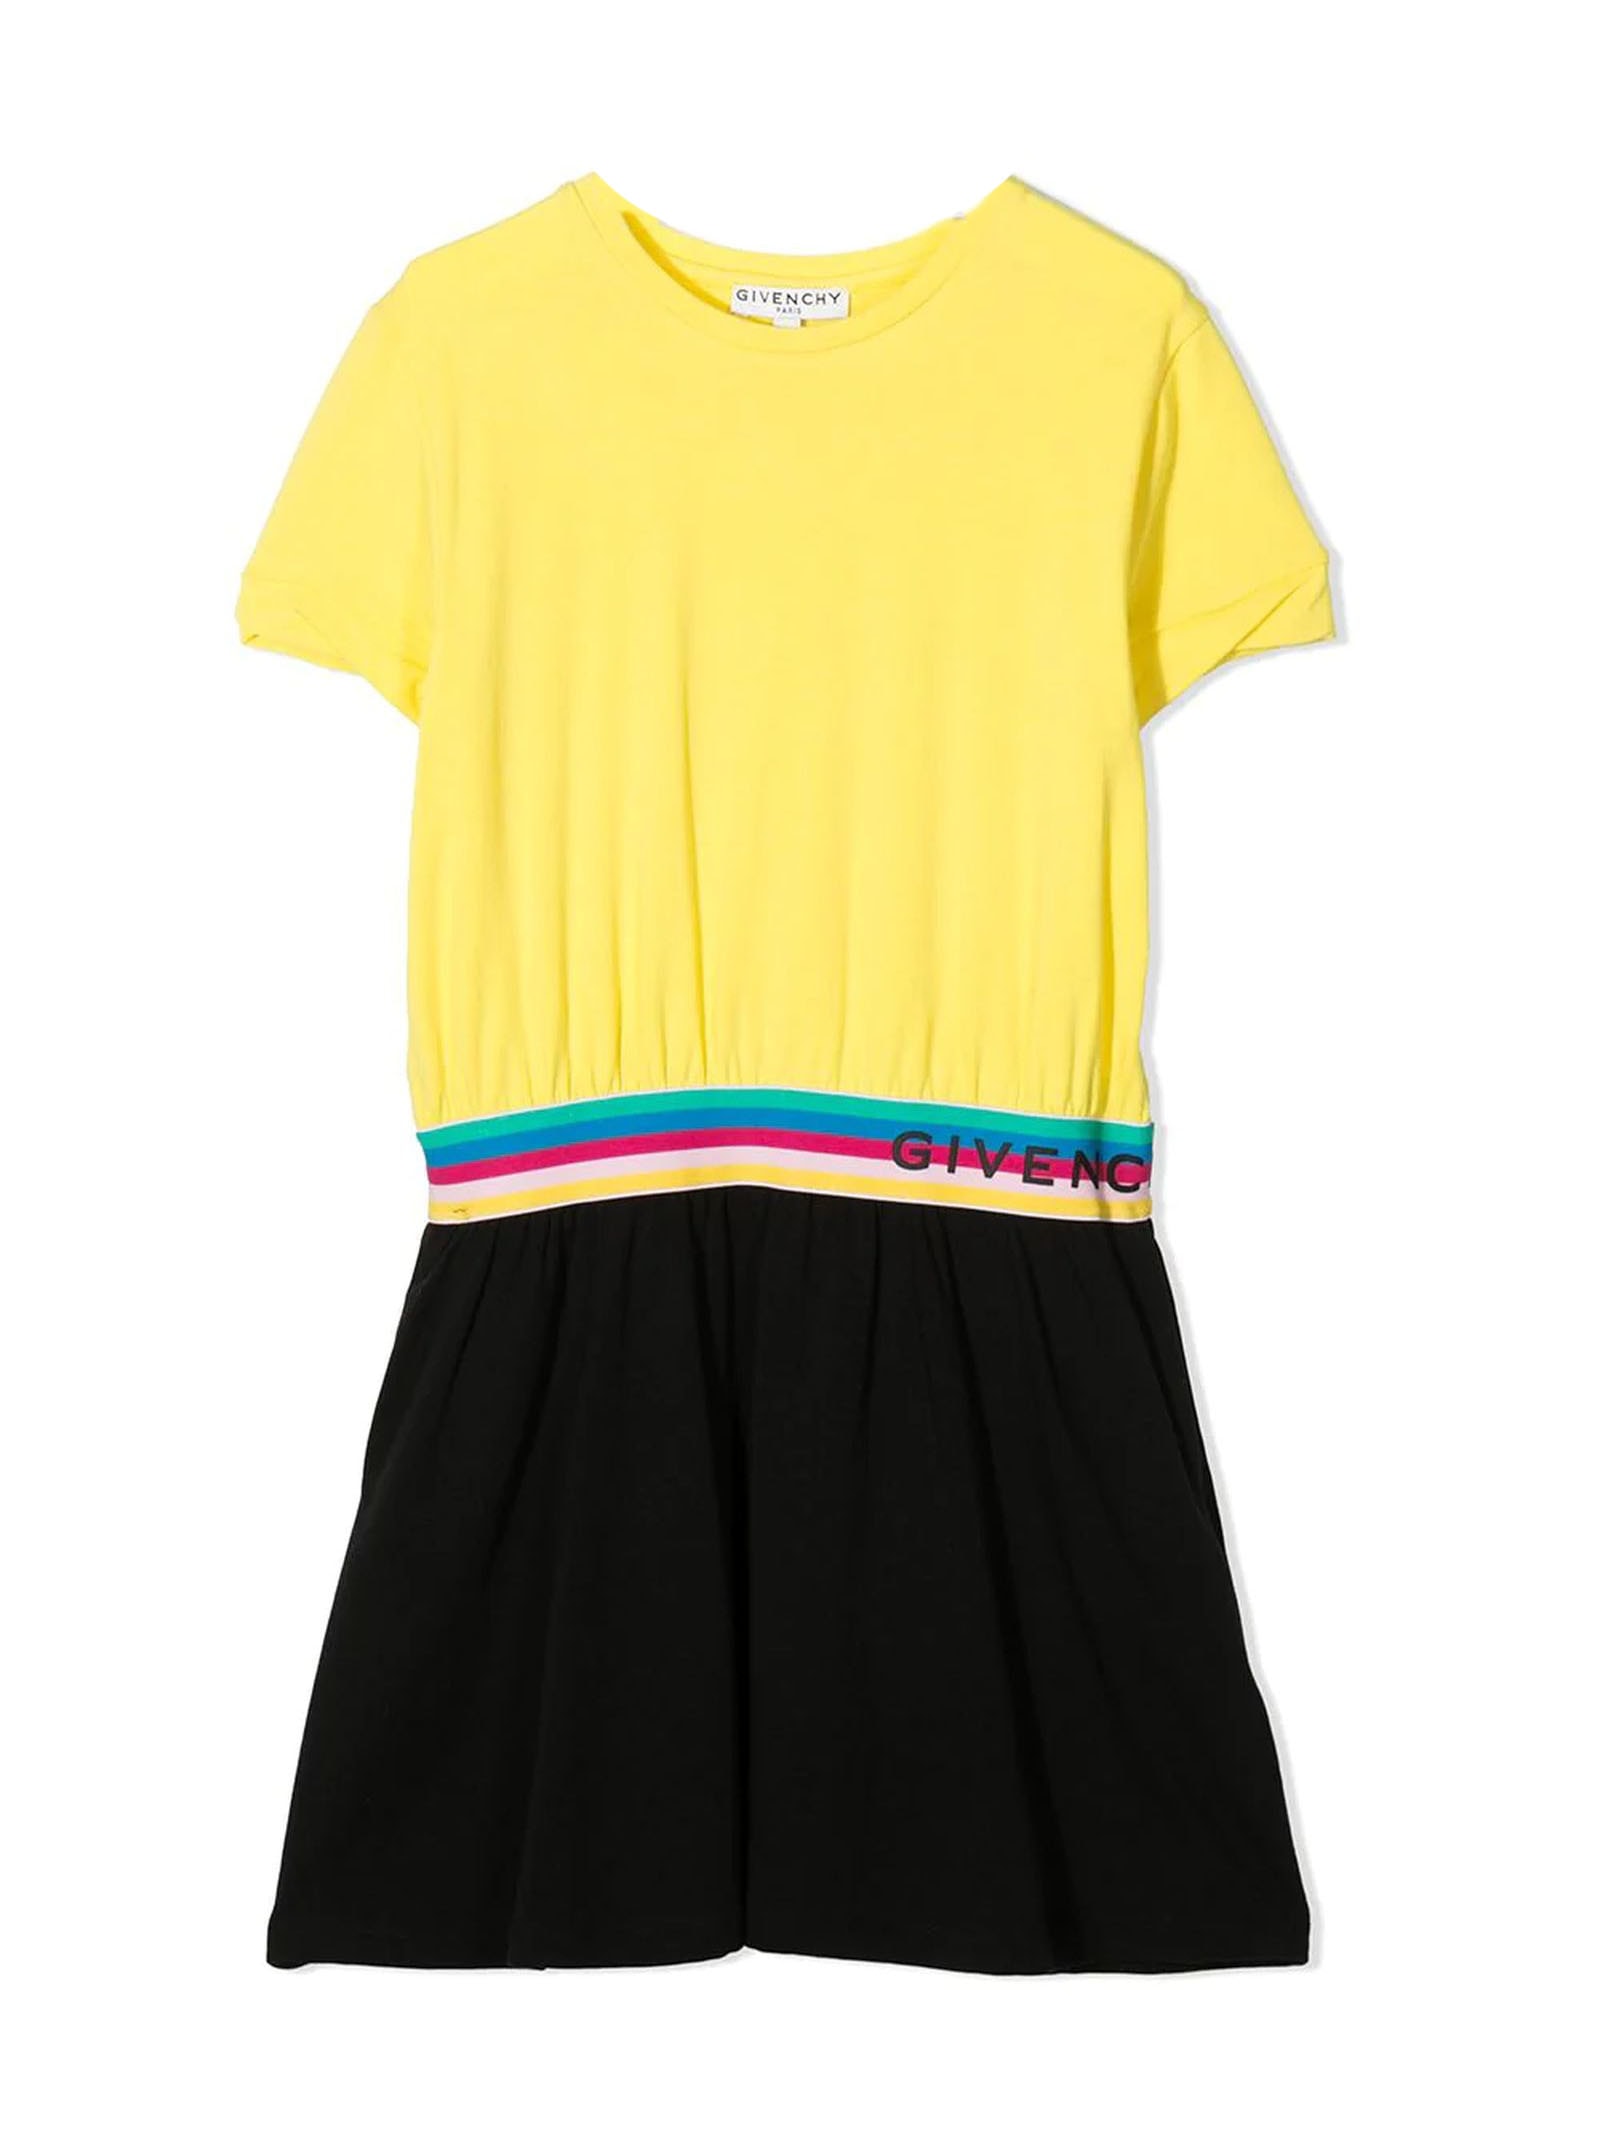 Givenchy Yellow And Black Cotton T-shirt Dress